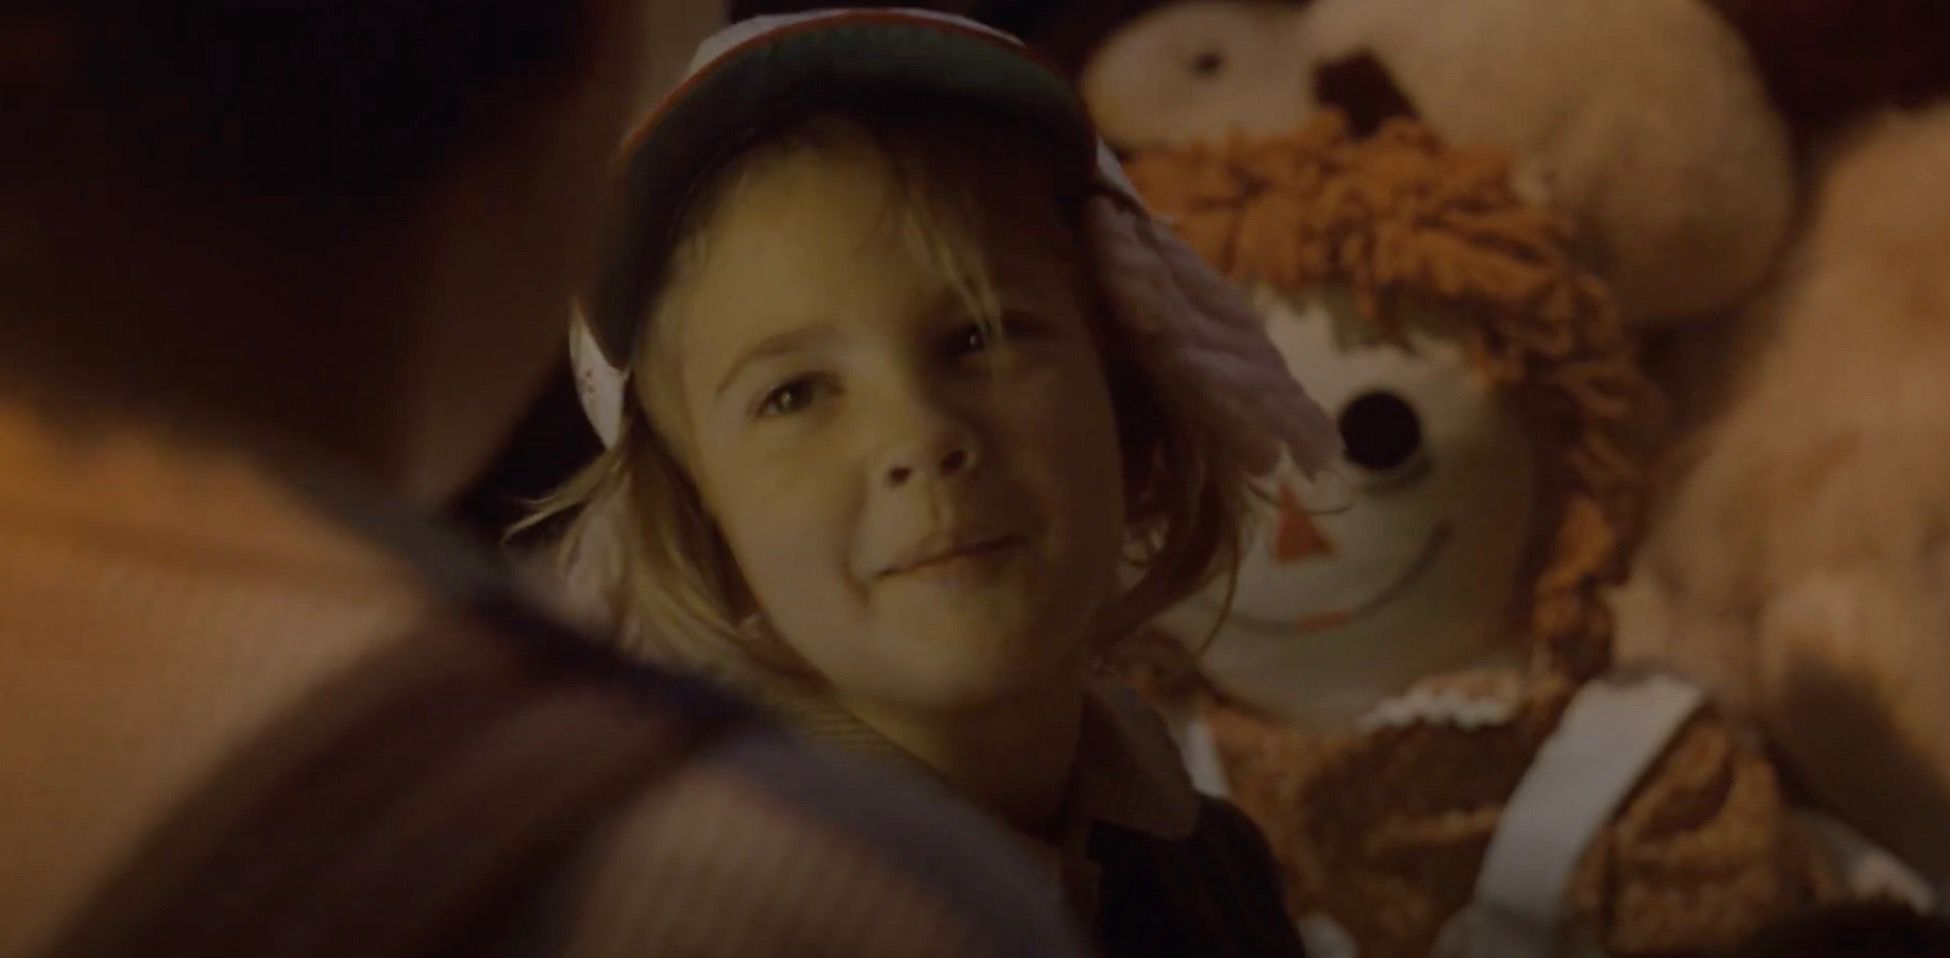 Drew Barrymore as a little girl talking to Elliott with stuffed animals behind her in E.T.